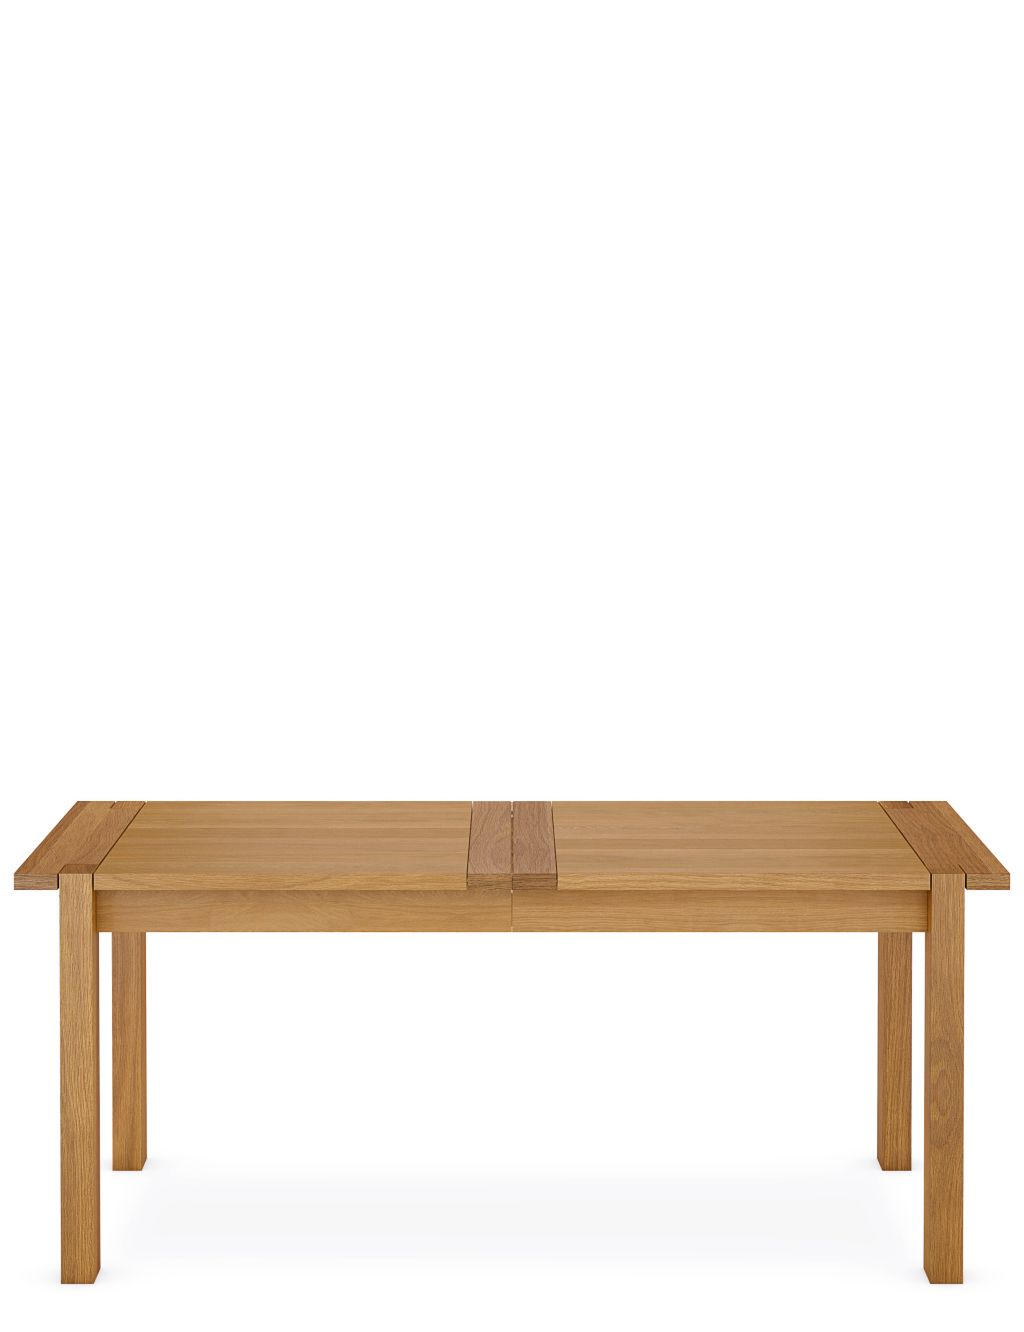 Sonoma™ 8-10 Seater Extending Dining Table image 2